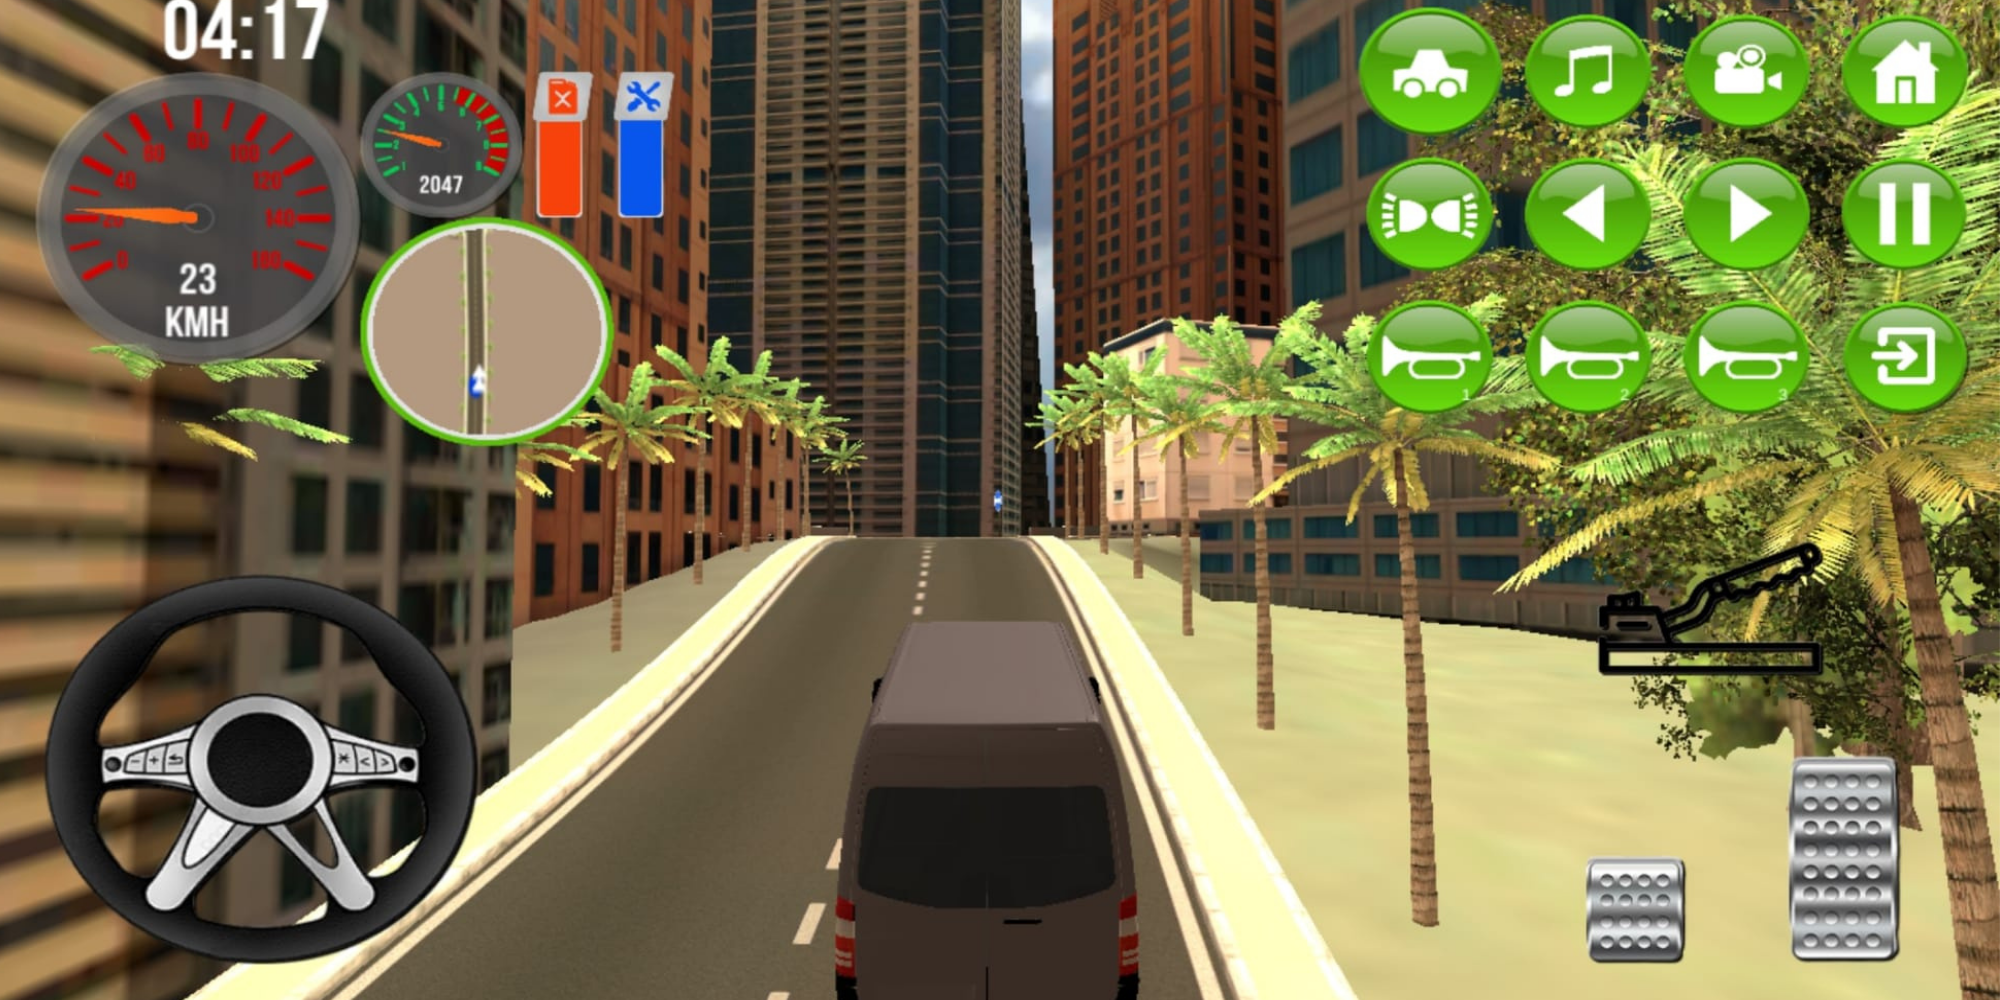 Minibus City Driving Simulator for Android - Download